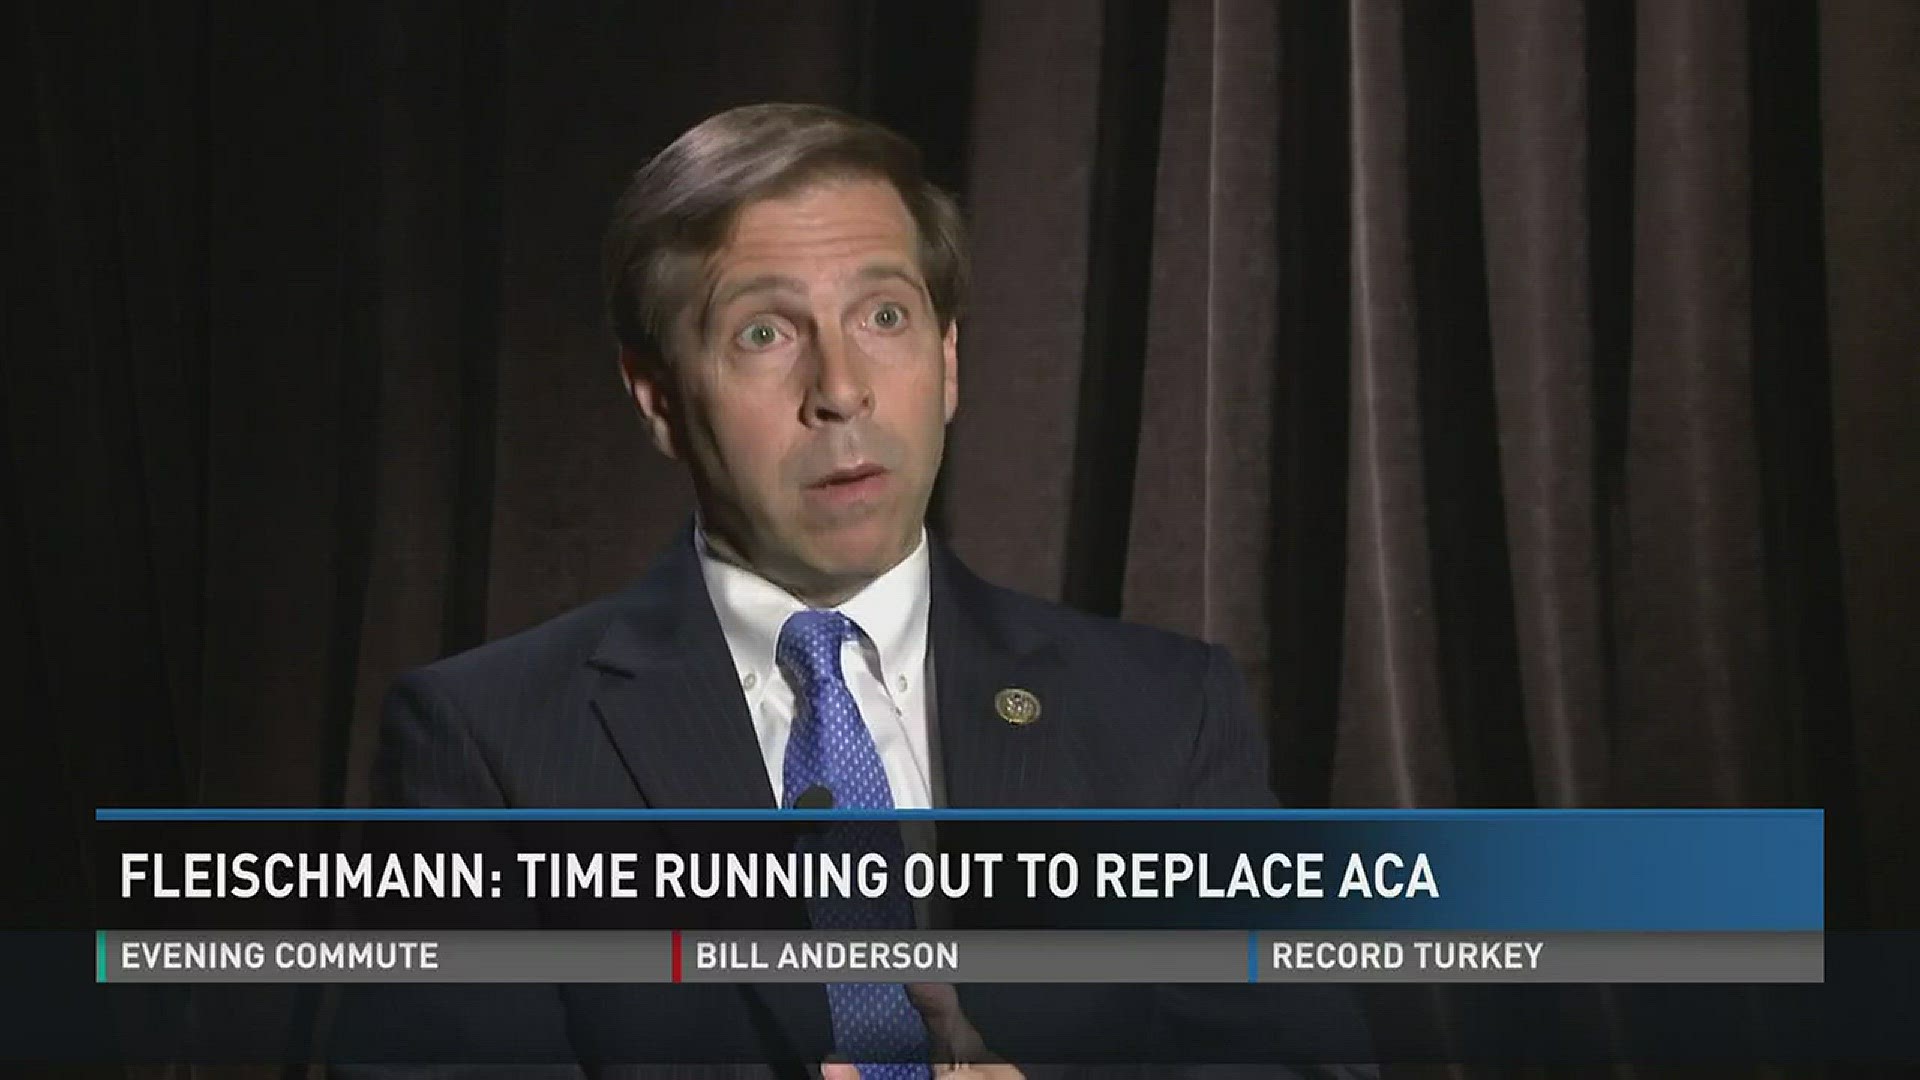 April 18, 2017: Tennessee Rep. Chuck Fleischman says Republicans are running out of time to repeal and replace the Affordable Care Act.